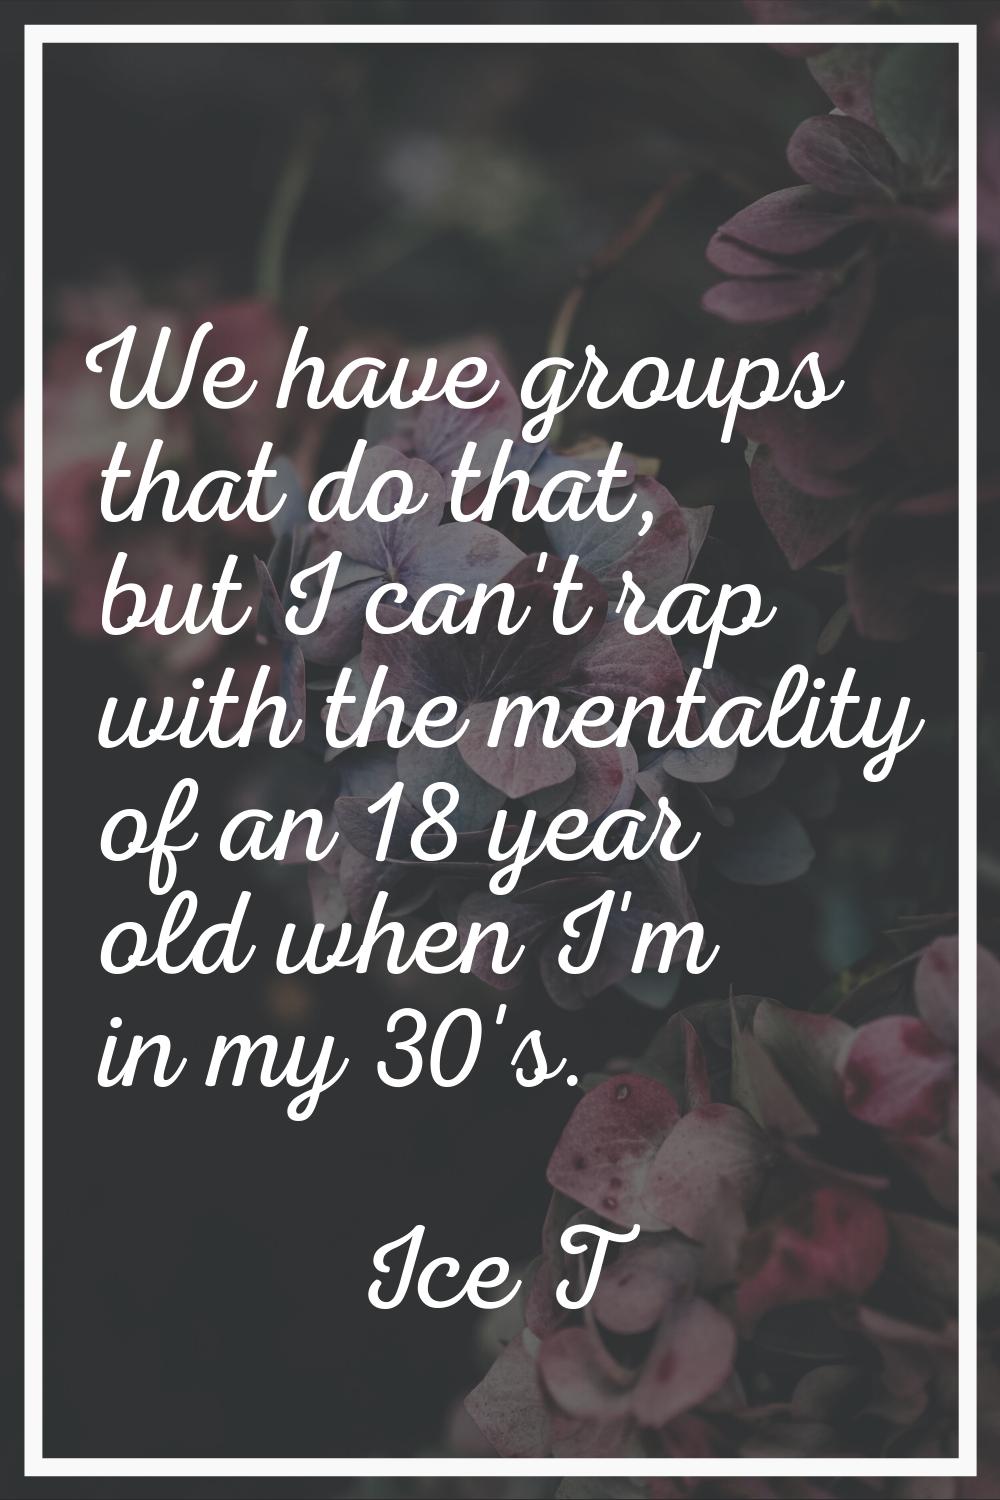 We have groups that do that, but I can't rap with the mentality of an 18 year old when I'm in my 30